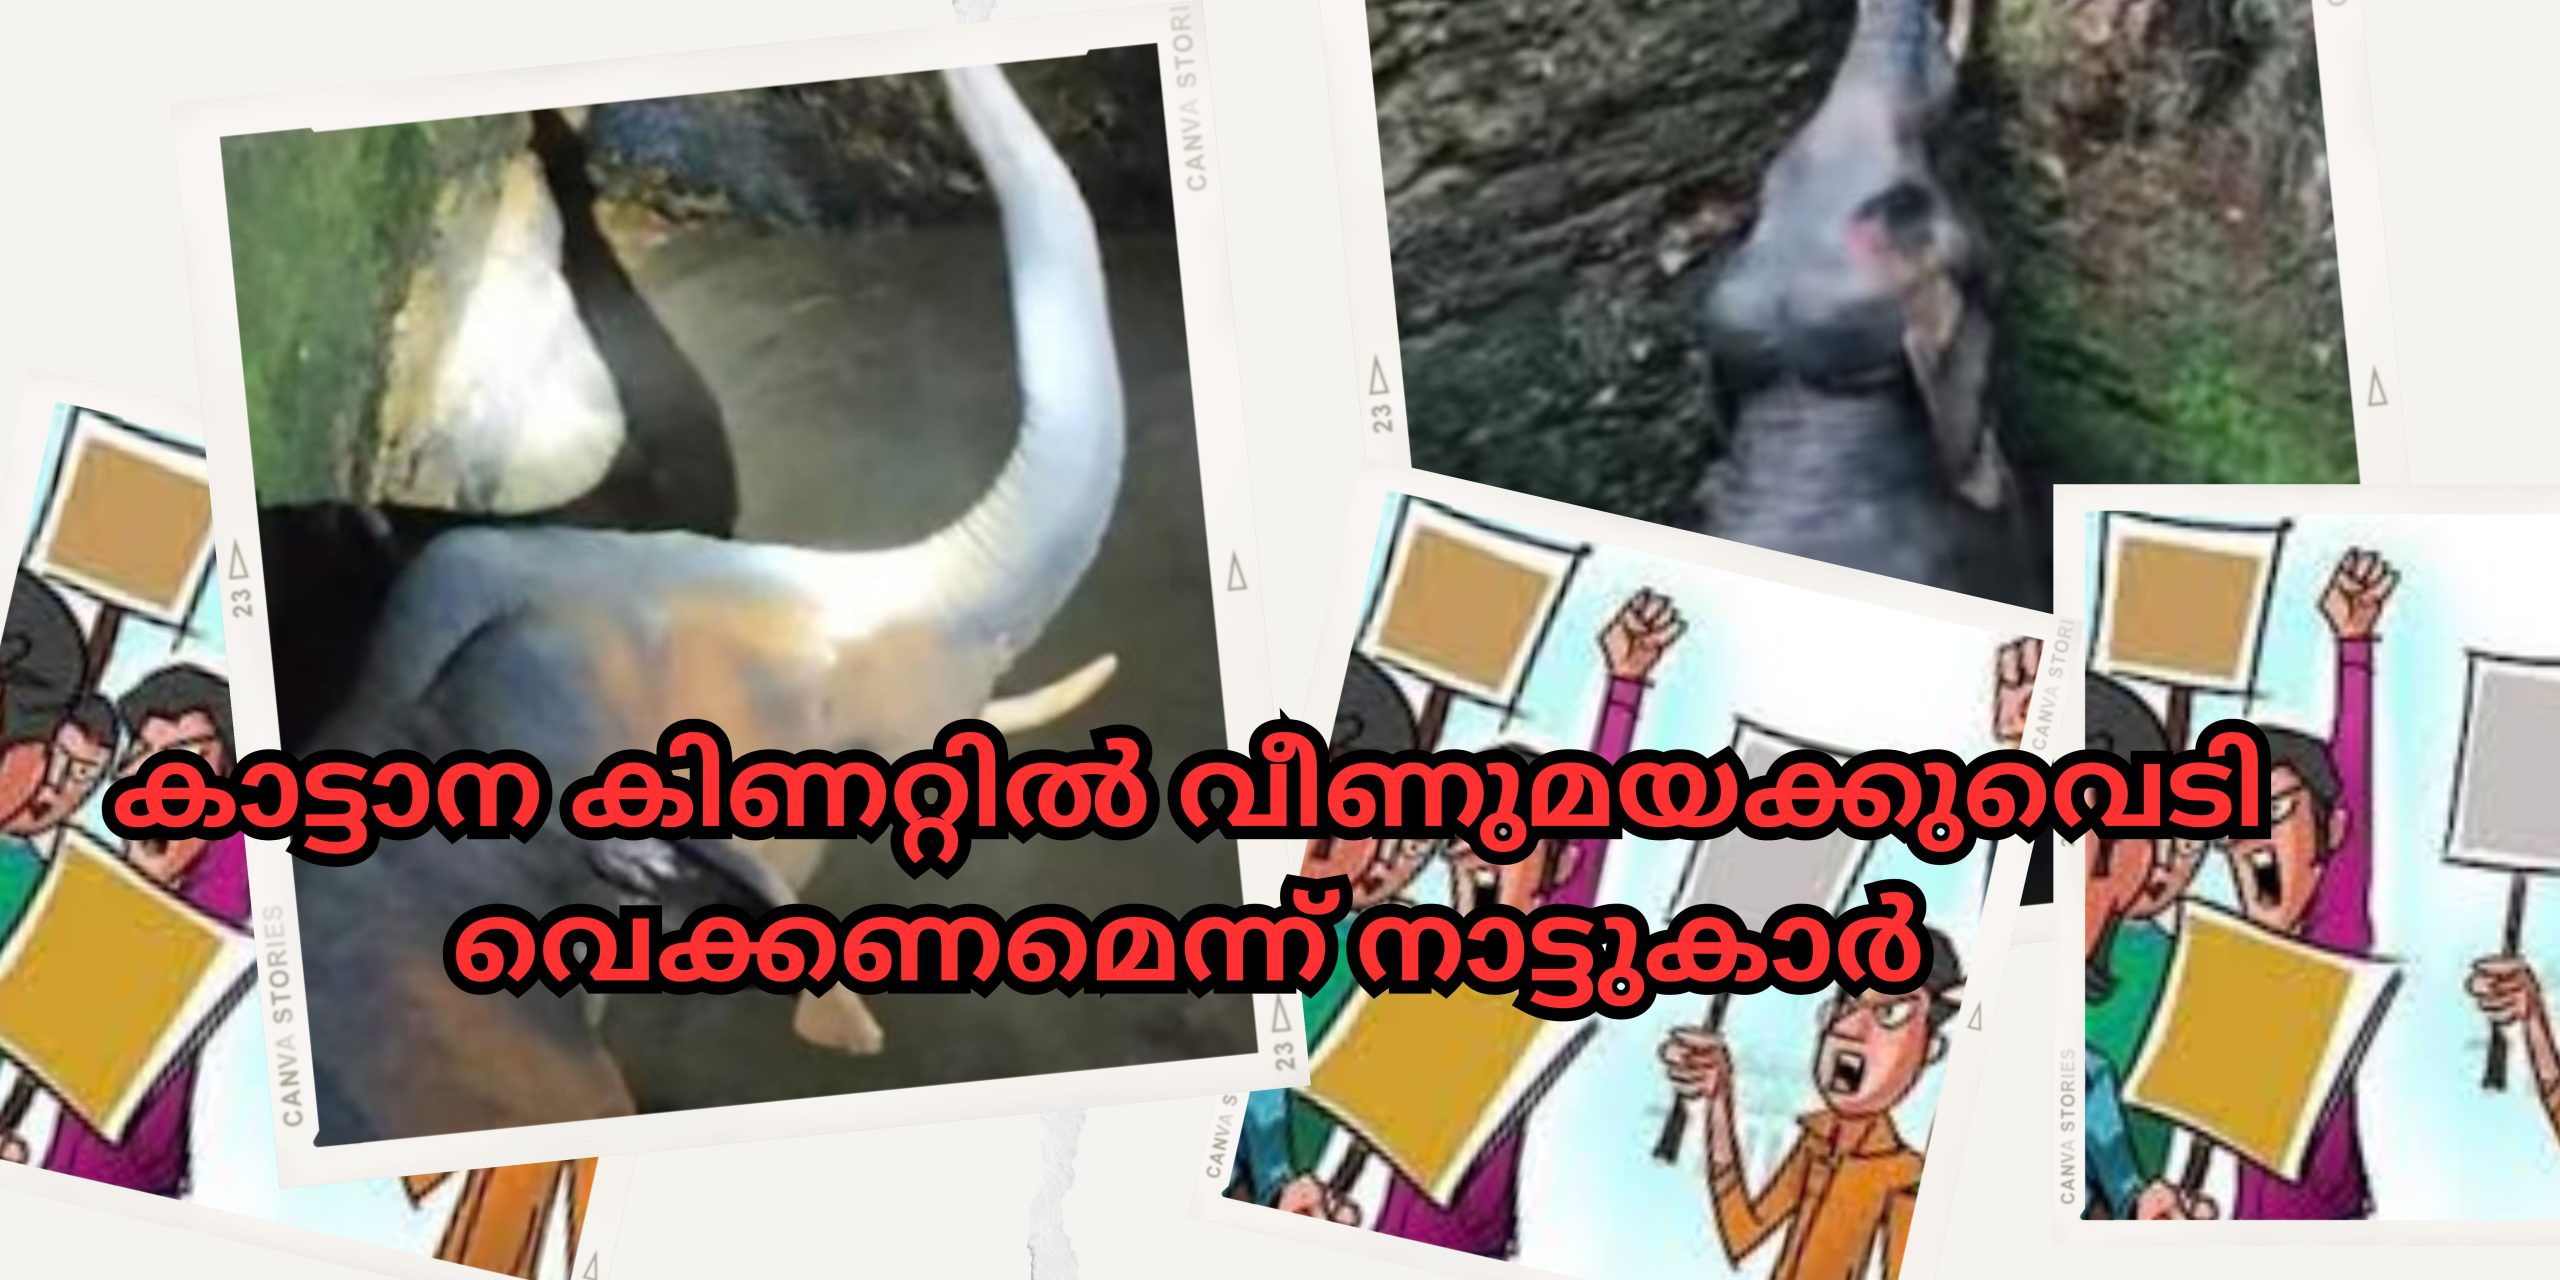 A wild animal fell into a well in the residential area of Kothamangalam; Locals want drug bust